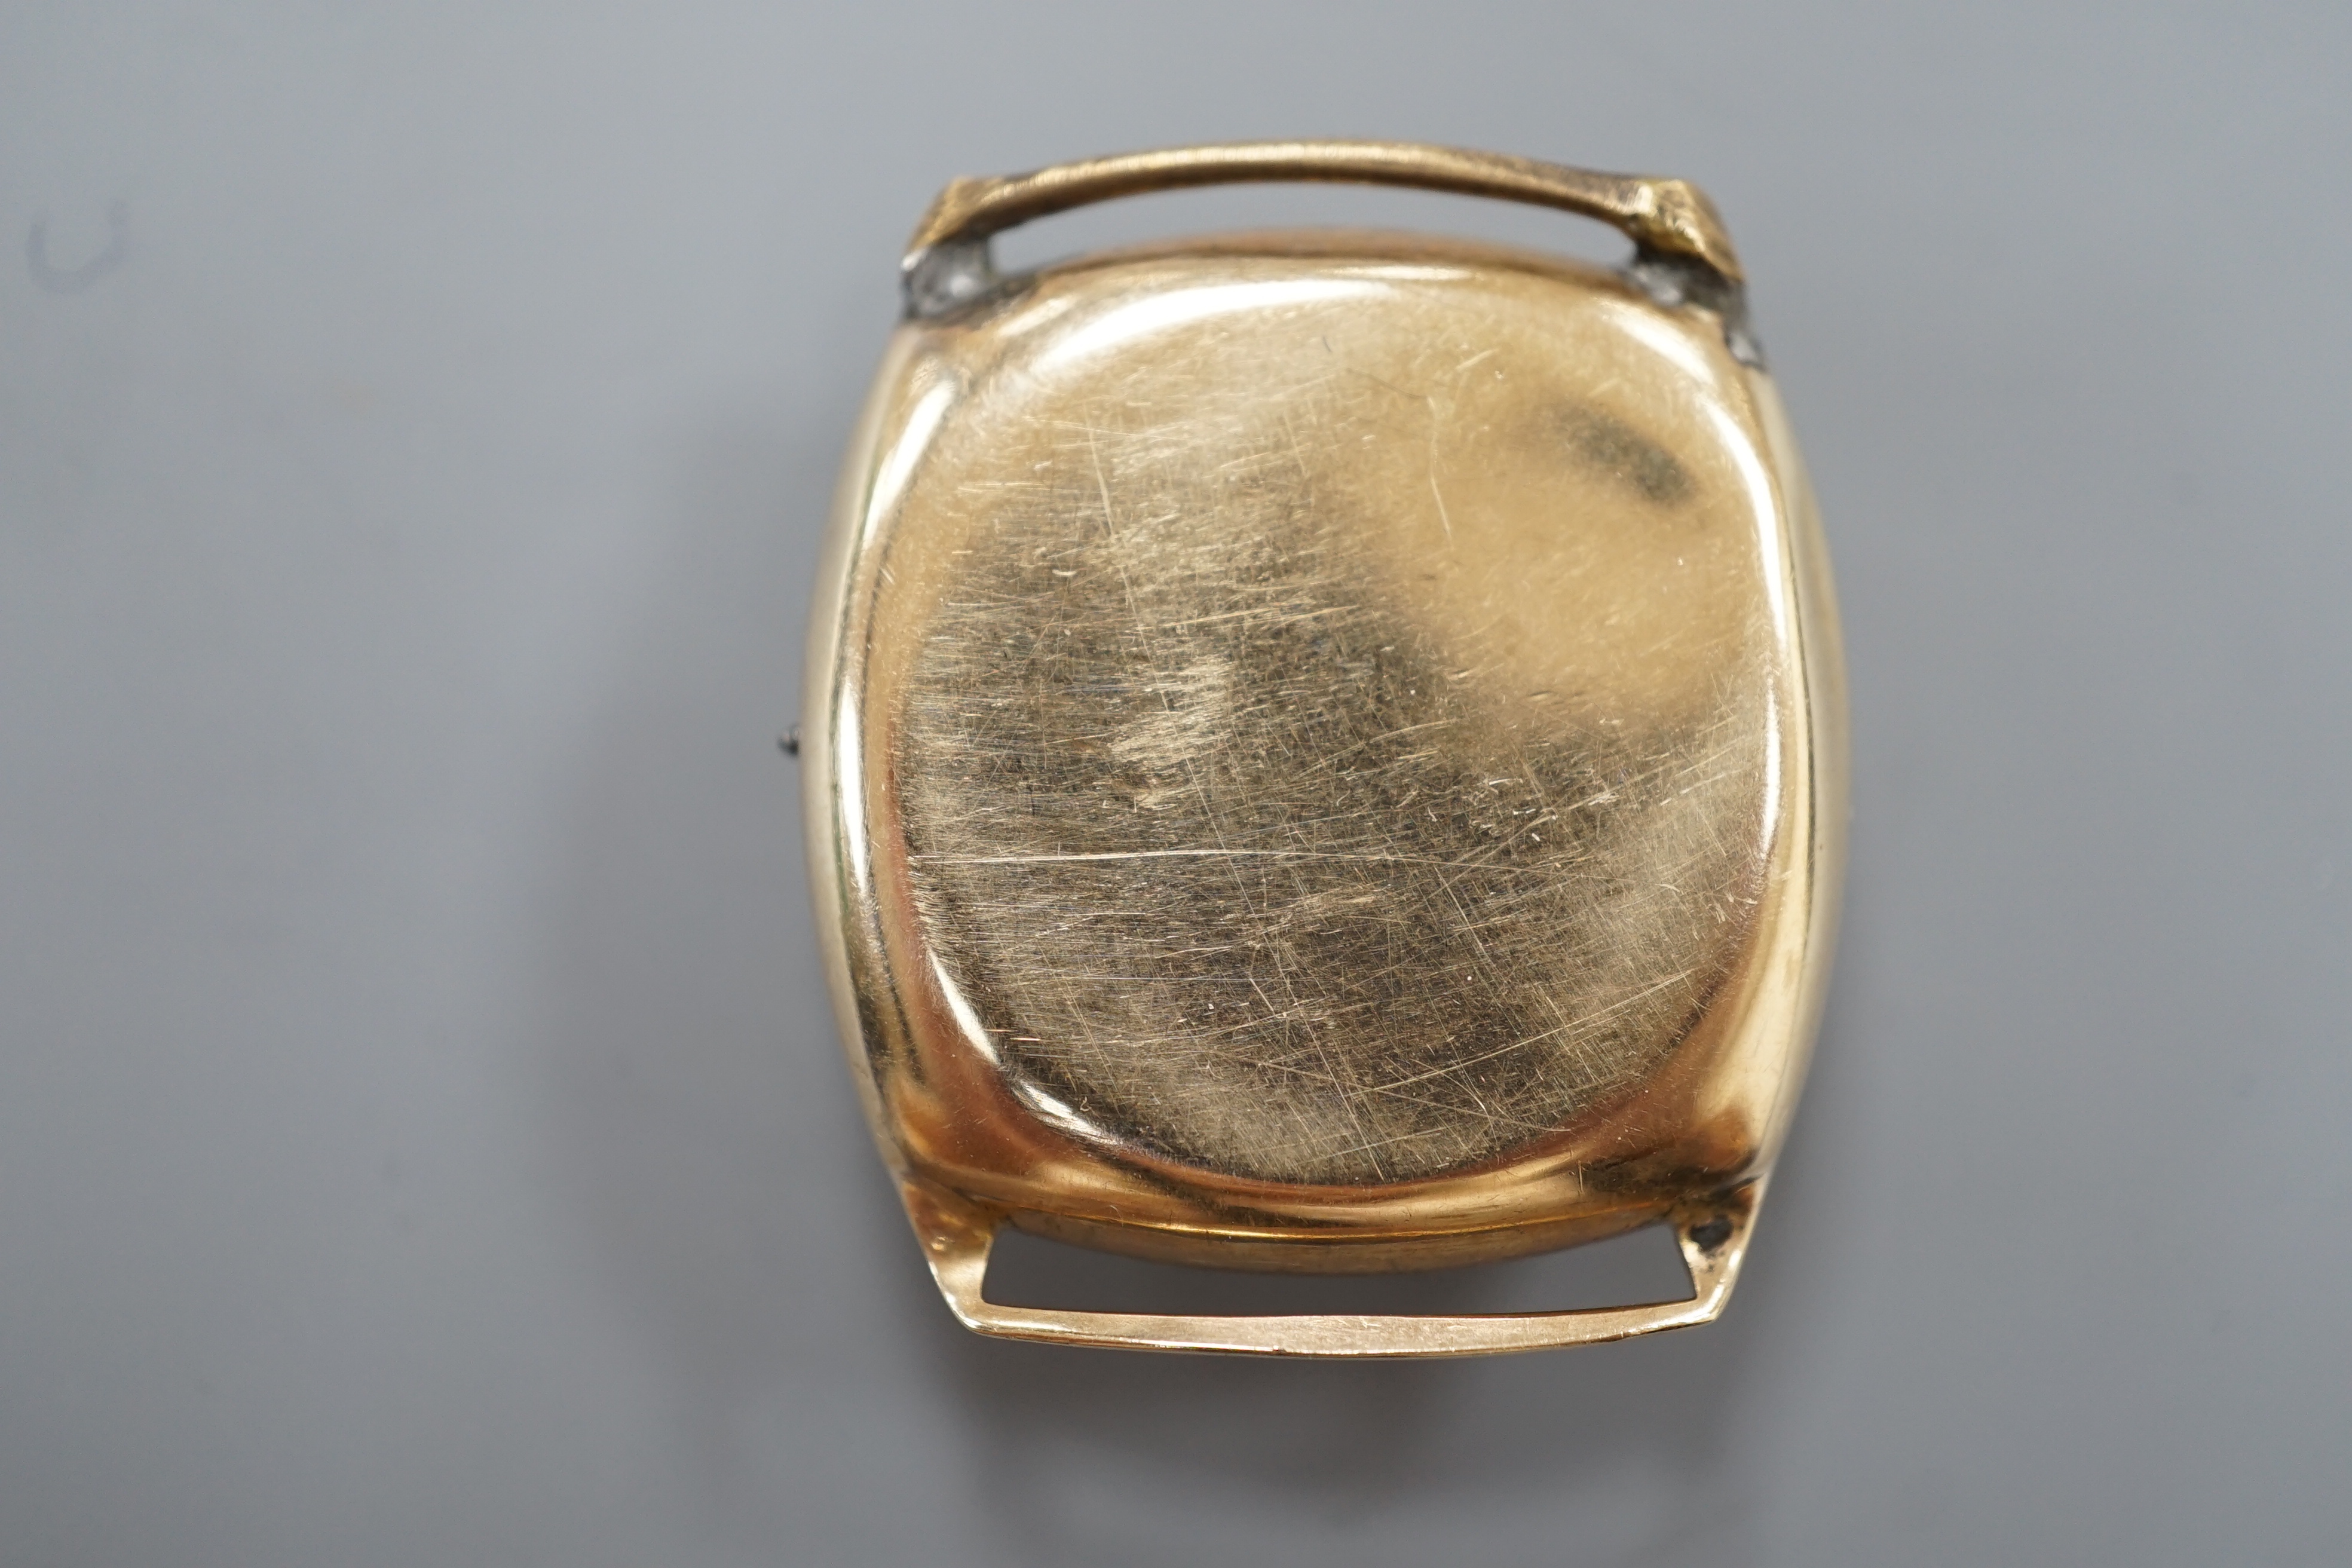 A gentleman's 1940's 9ct gold Rolex Sport manual wind wrist watch, with Arabic dial and subsidiary seconds, case diameter 30mm, lacking winding crown and strap, gross weight 16.7 grams.